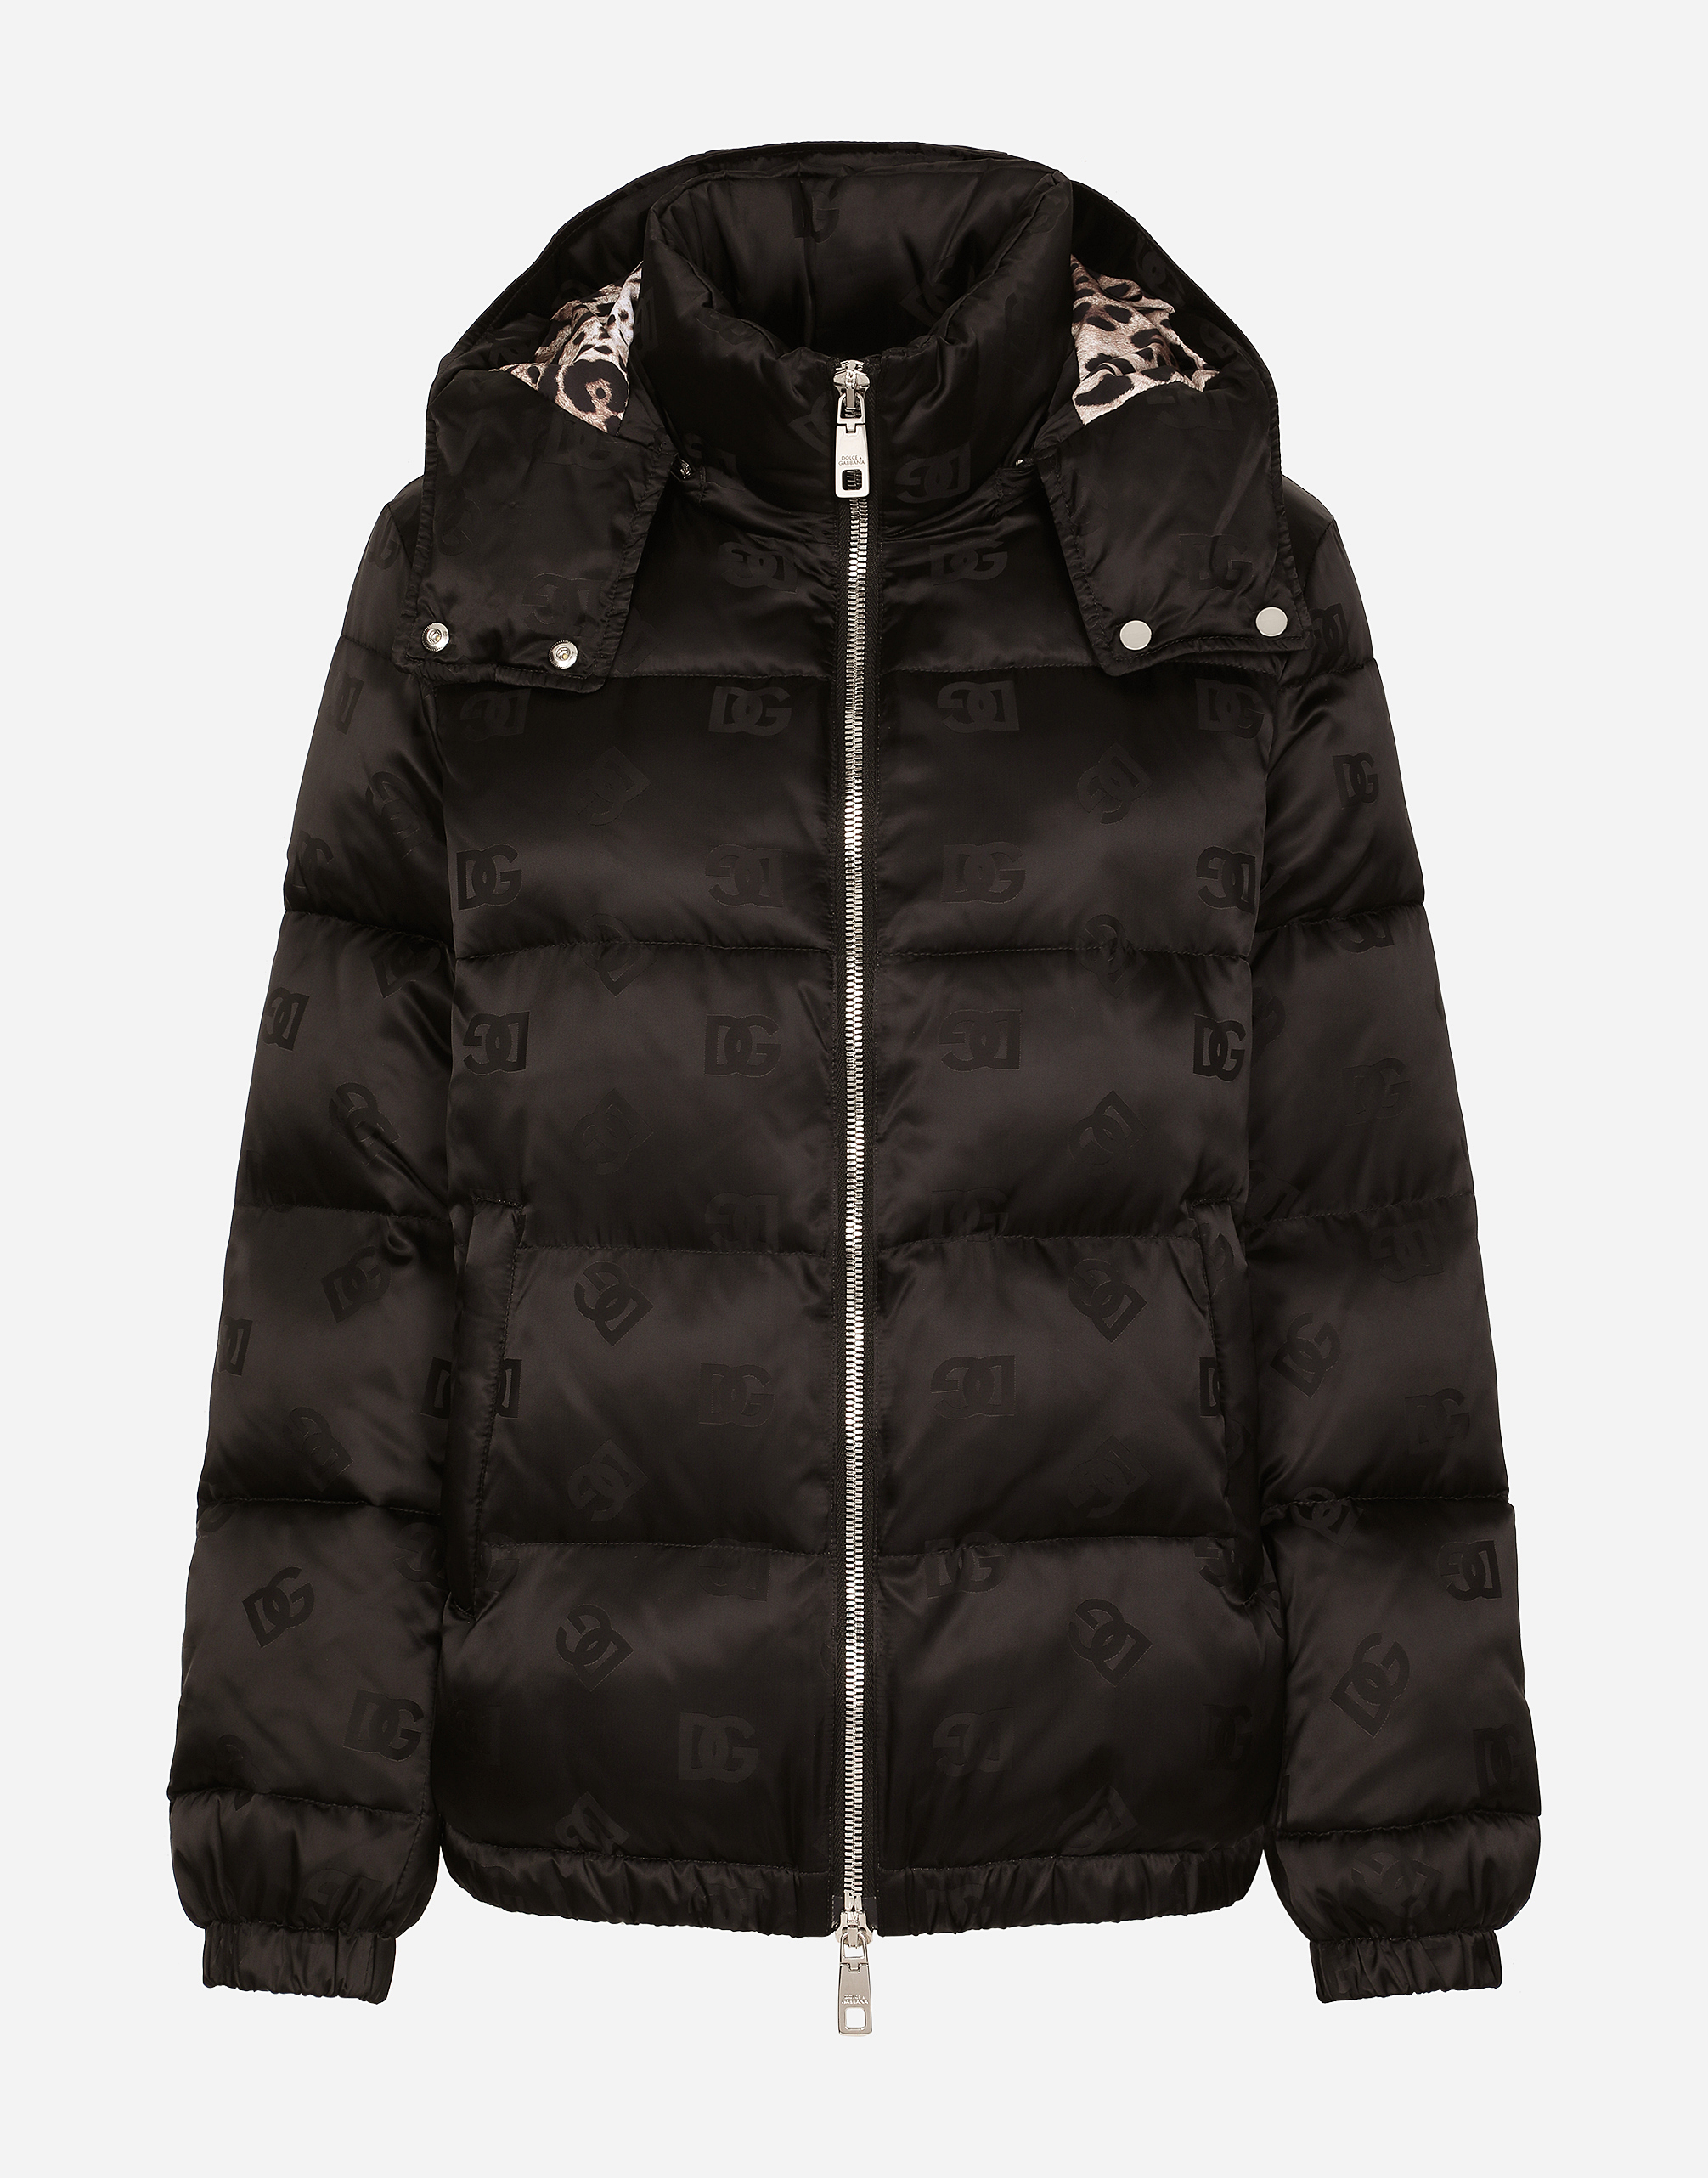 Satin jacquard down jacket with all-over DG logo in Black